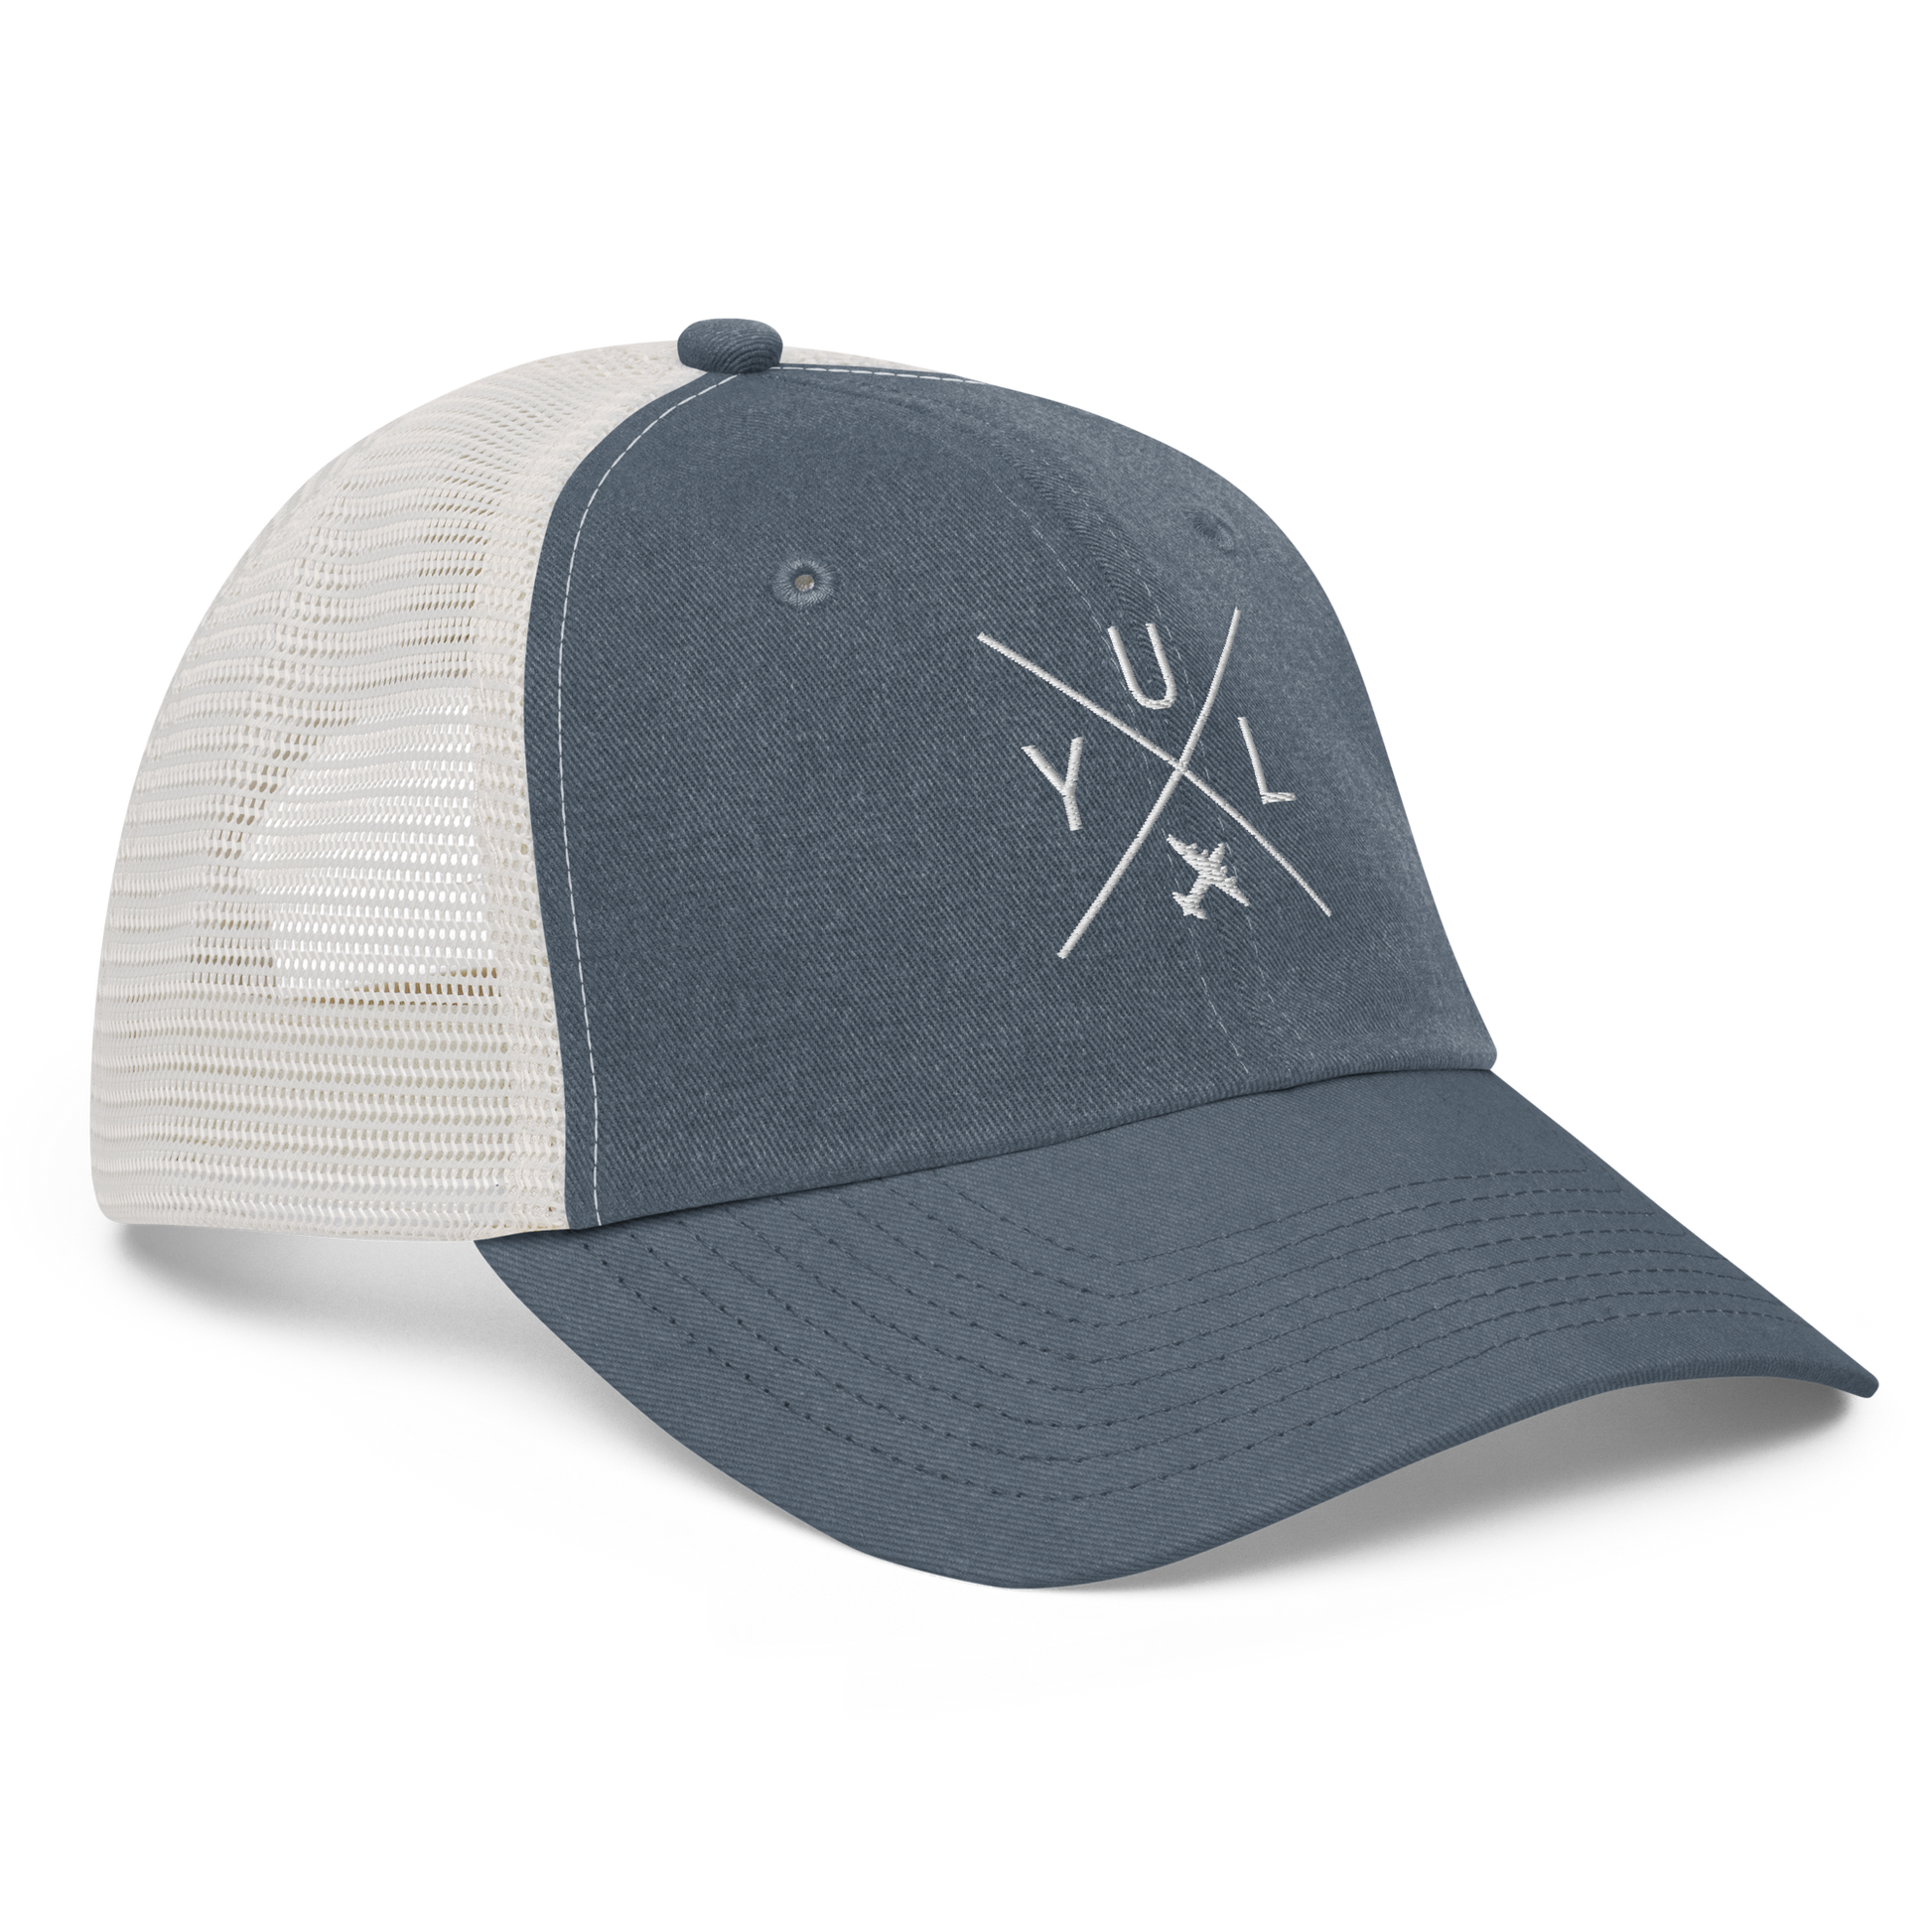 YHM Designs - YUL Montreal Pigment-Dyed Trucker Cap - Crossed-X Design with Airport Code and Vintage Propliner - White Embroidery - Image 07